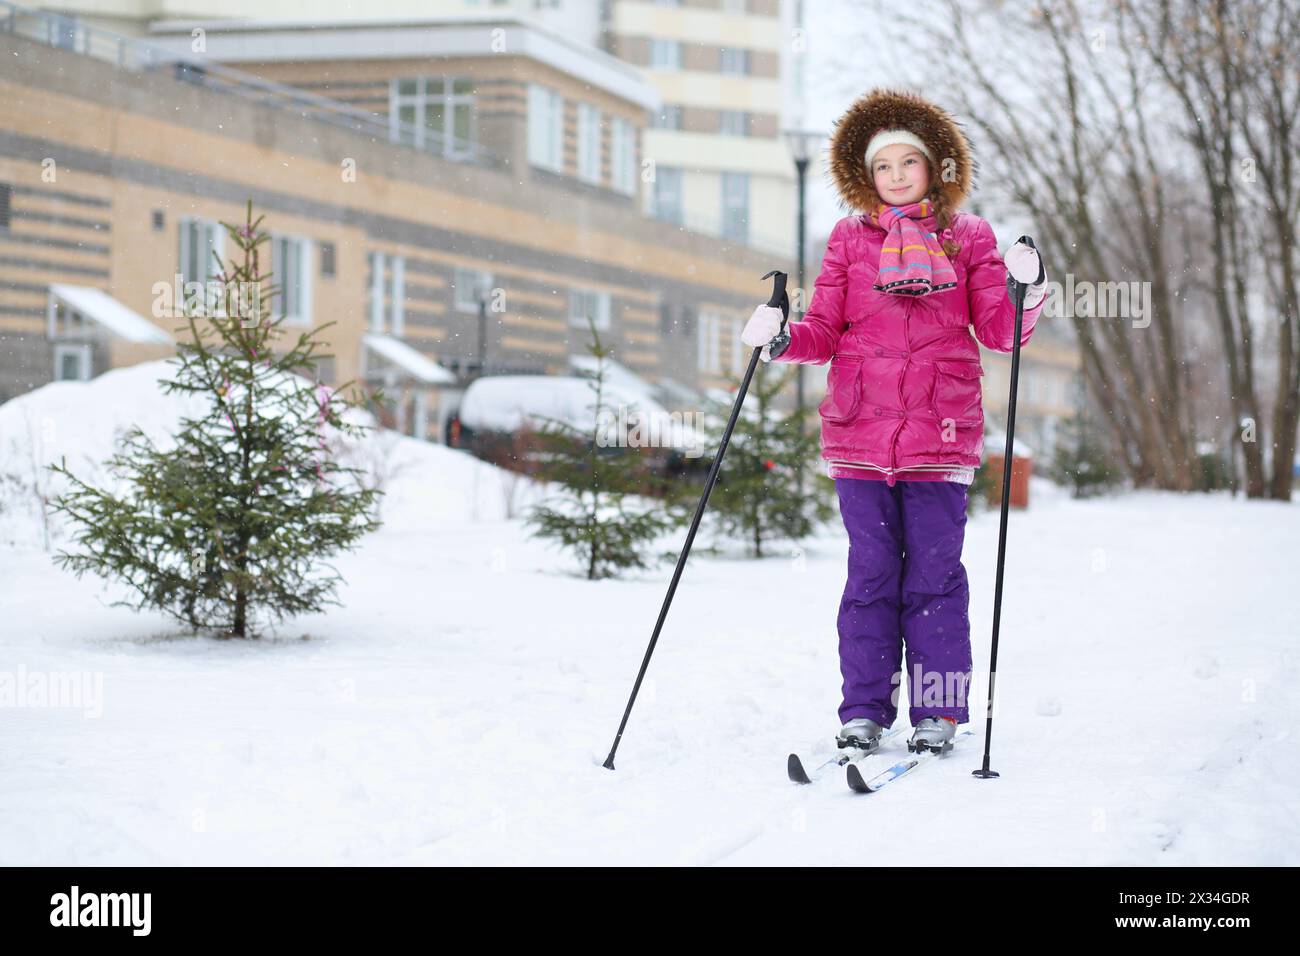 Little girl in a pink jacket with a hood skiing near the apartment complex Stock Photo